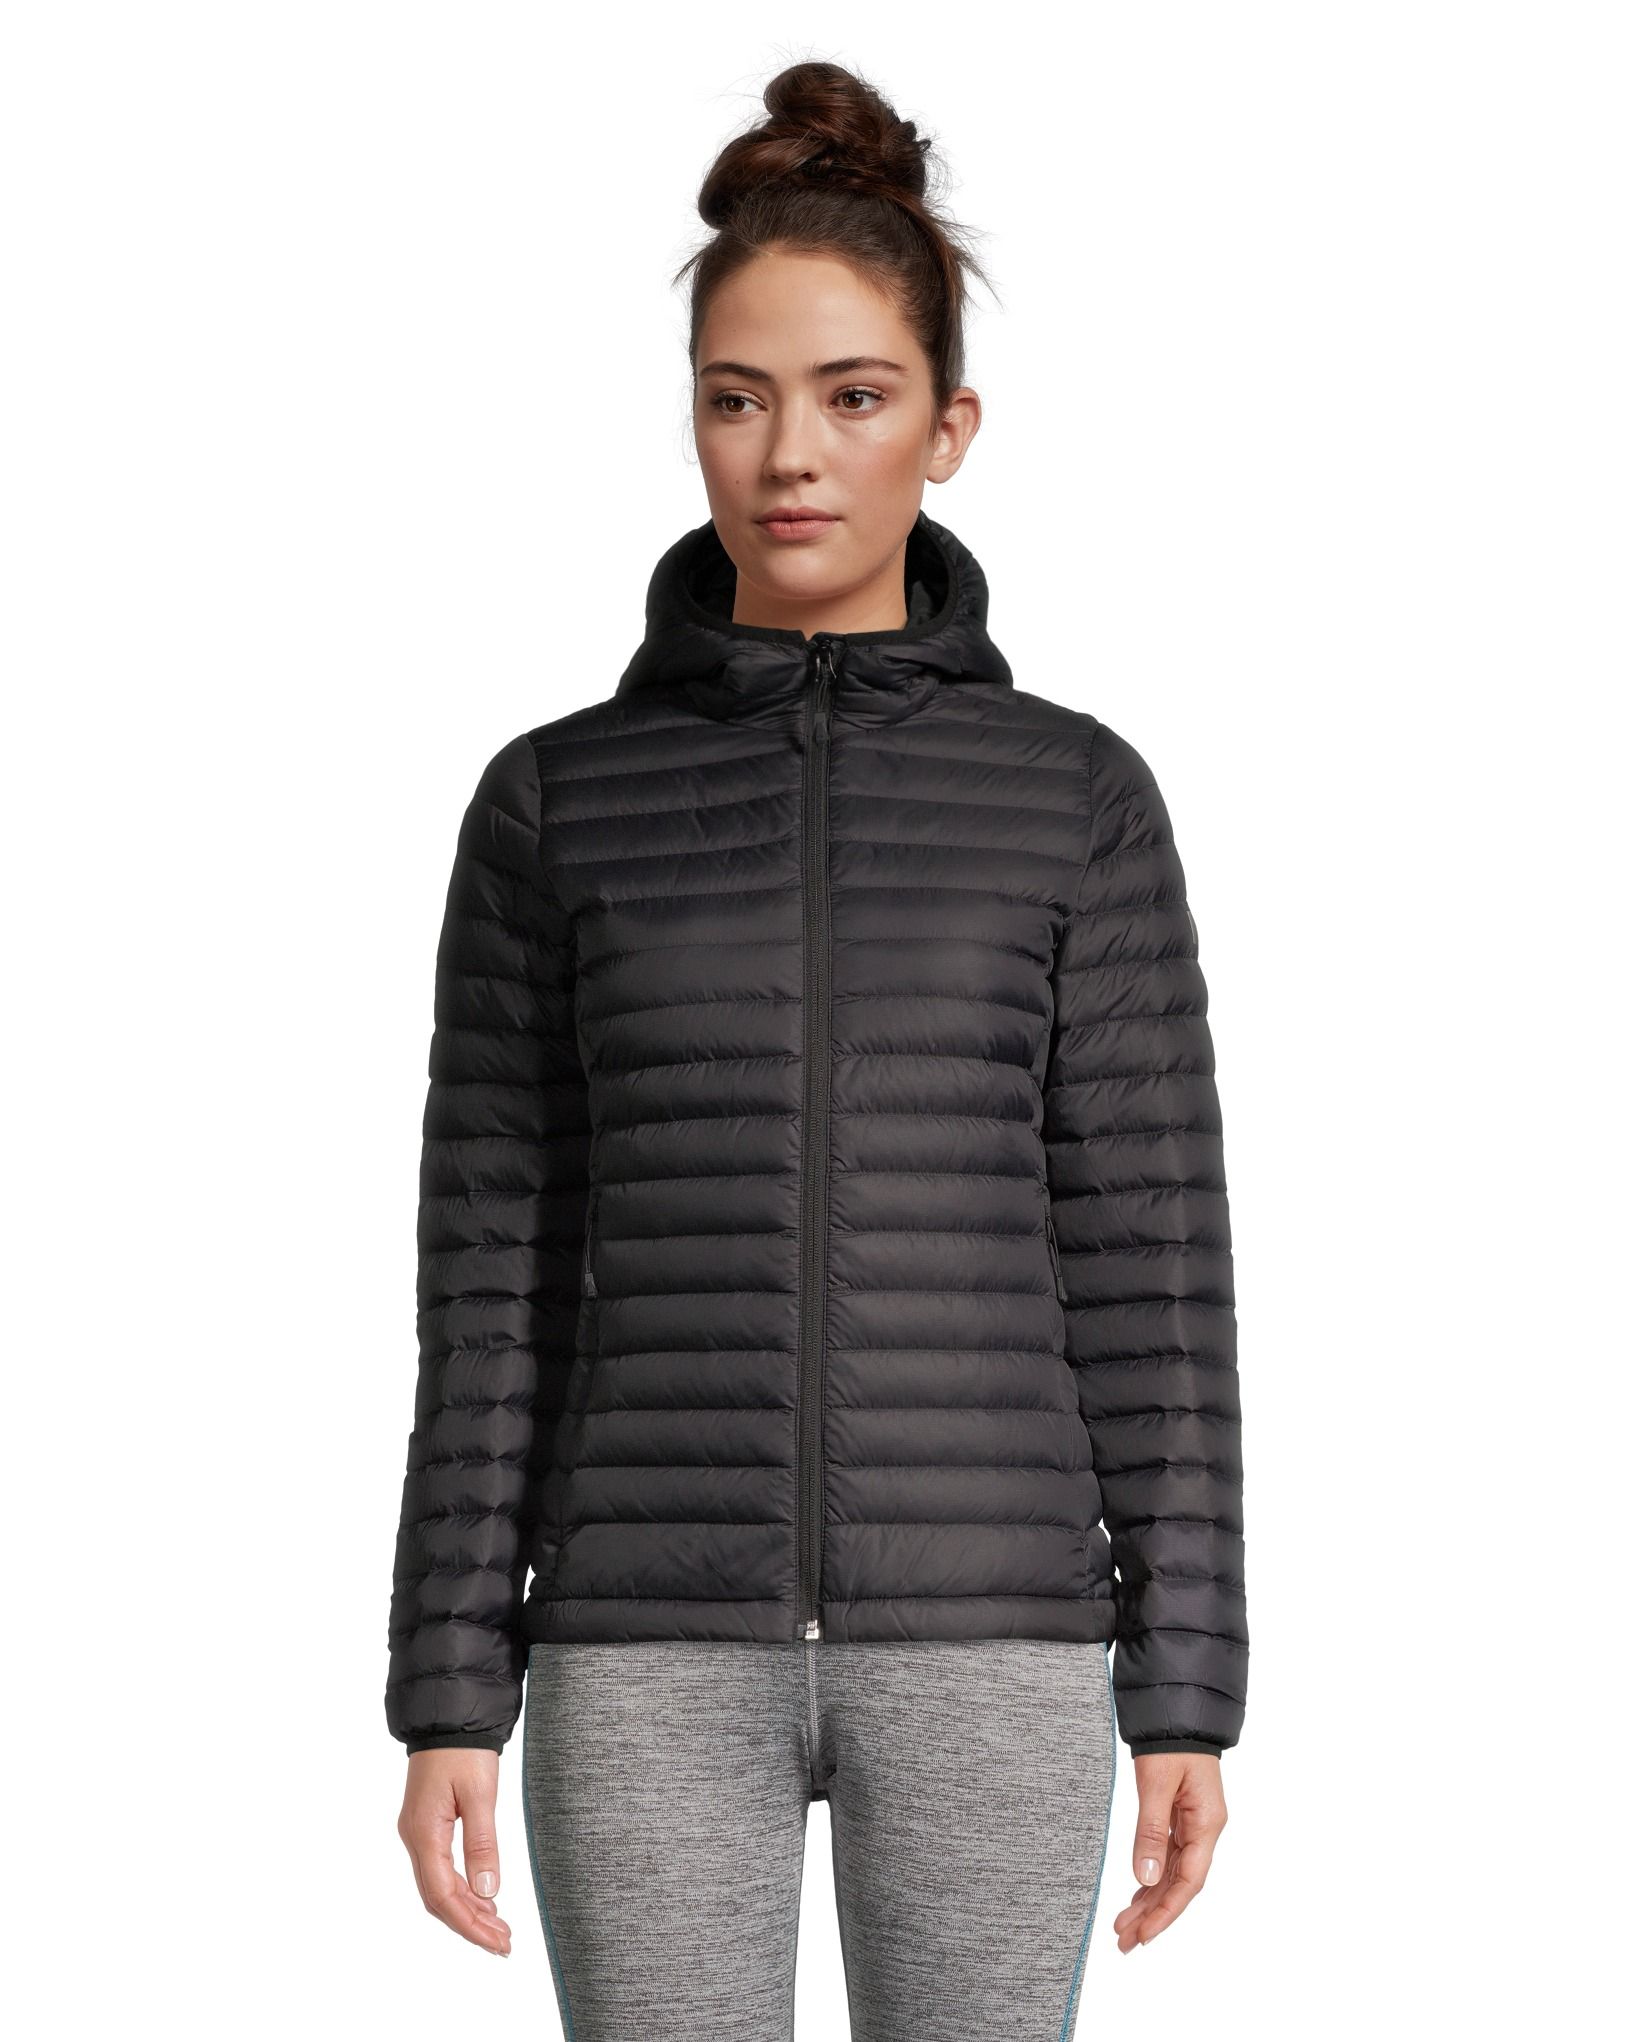 Helly Hansen Women's Sirdal Vest Synthetic Insulated Winter